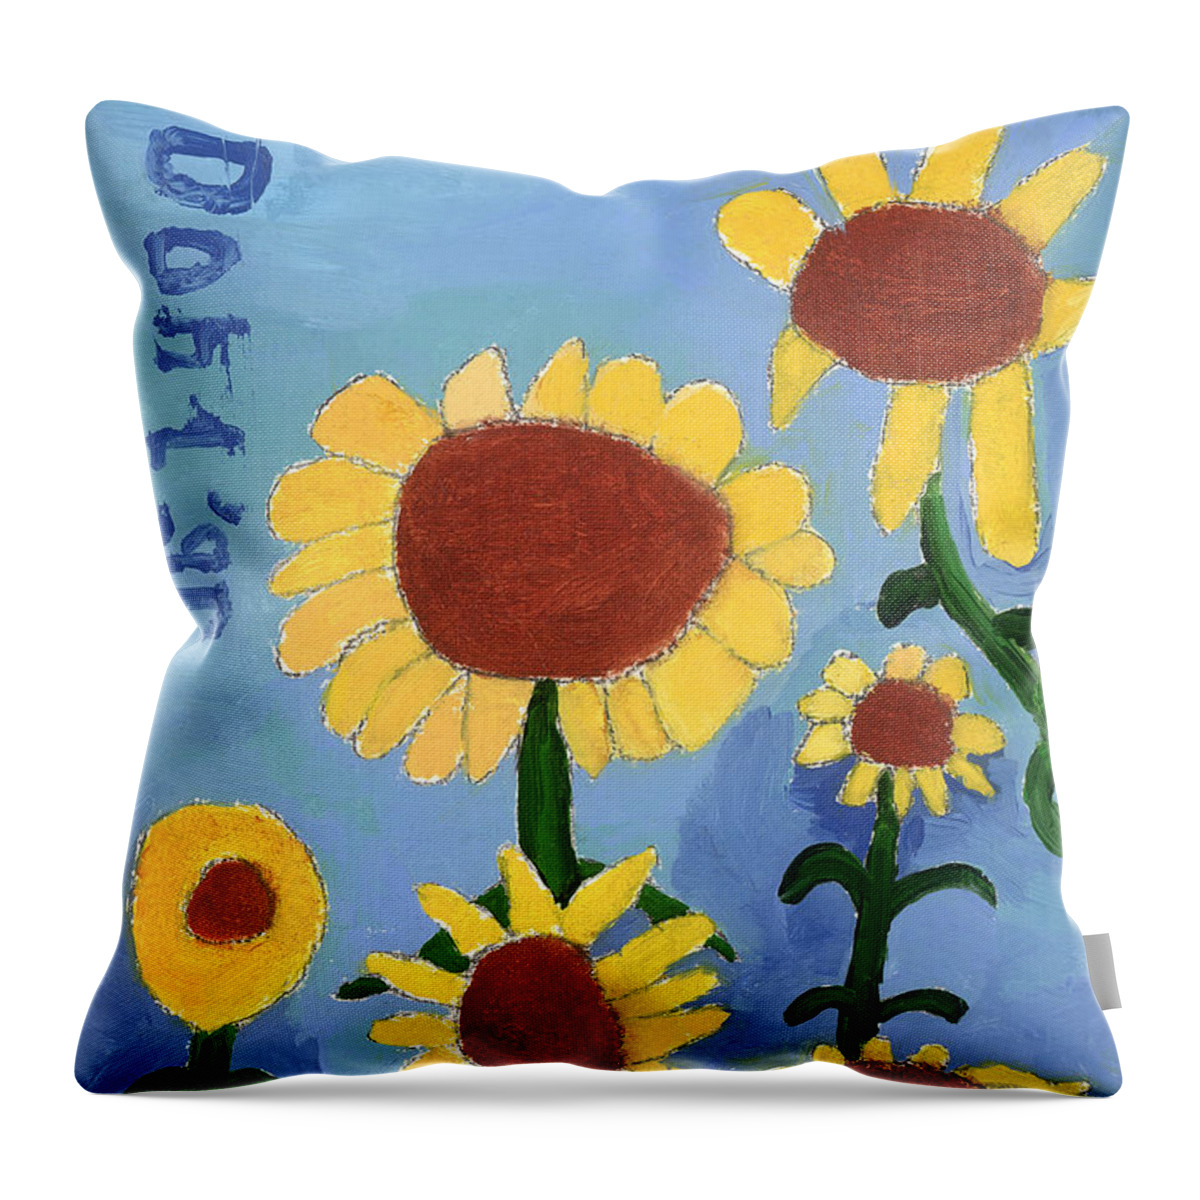  Throw Pillow featuring the painting Sunflowers by Don Larison